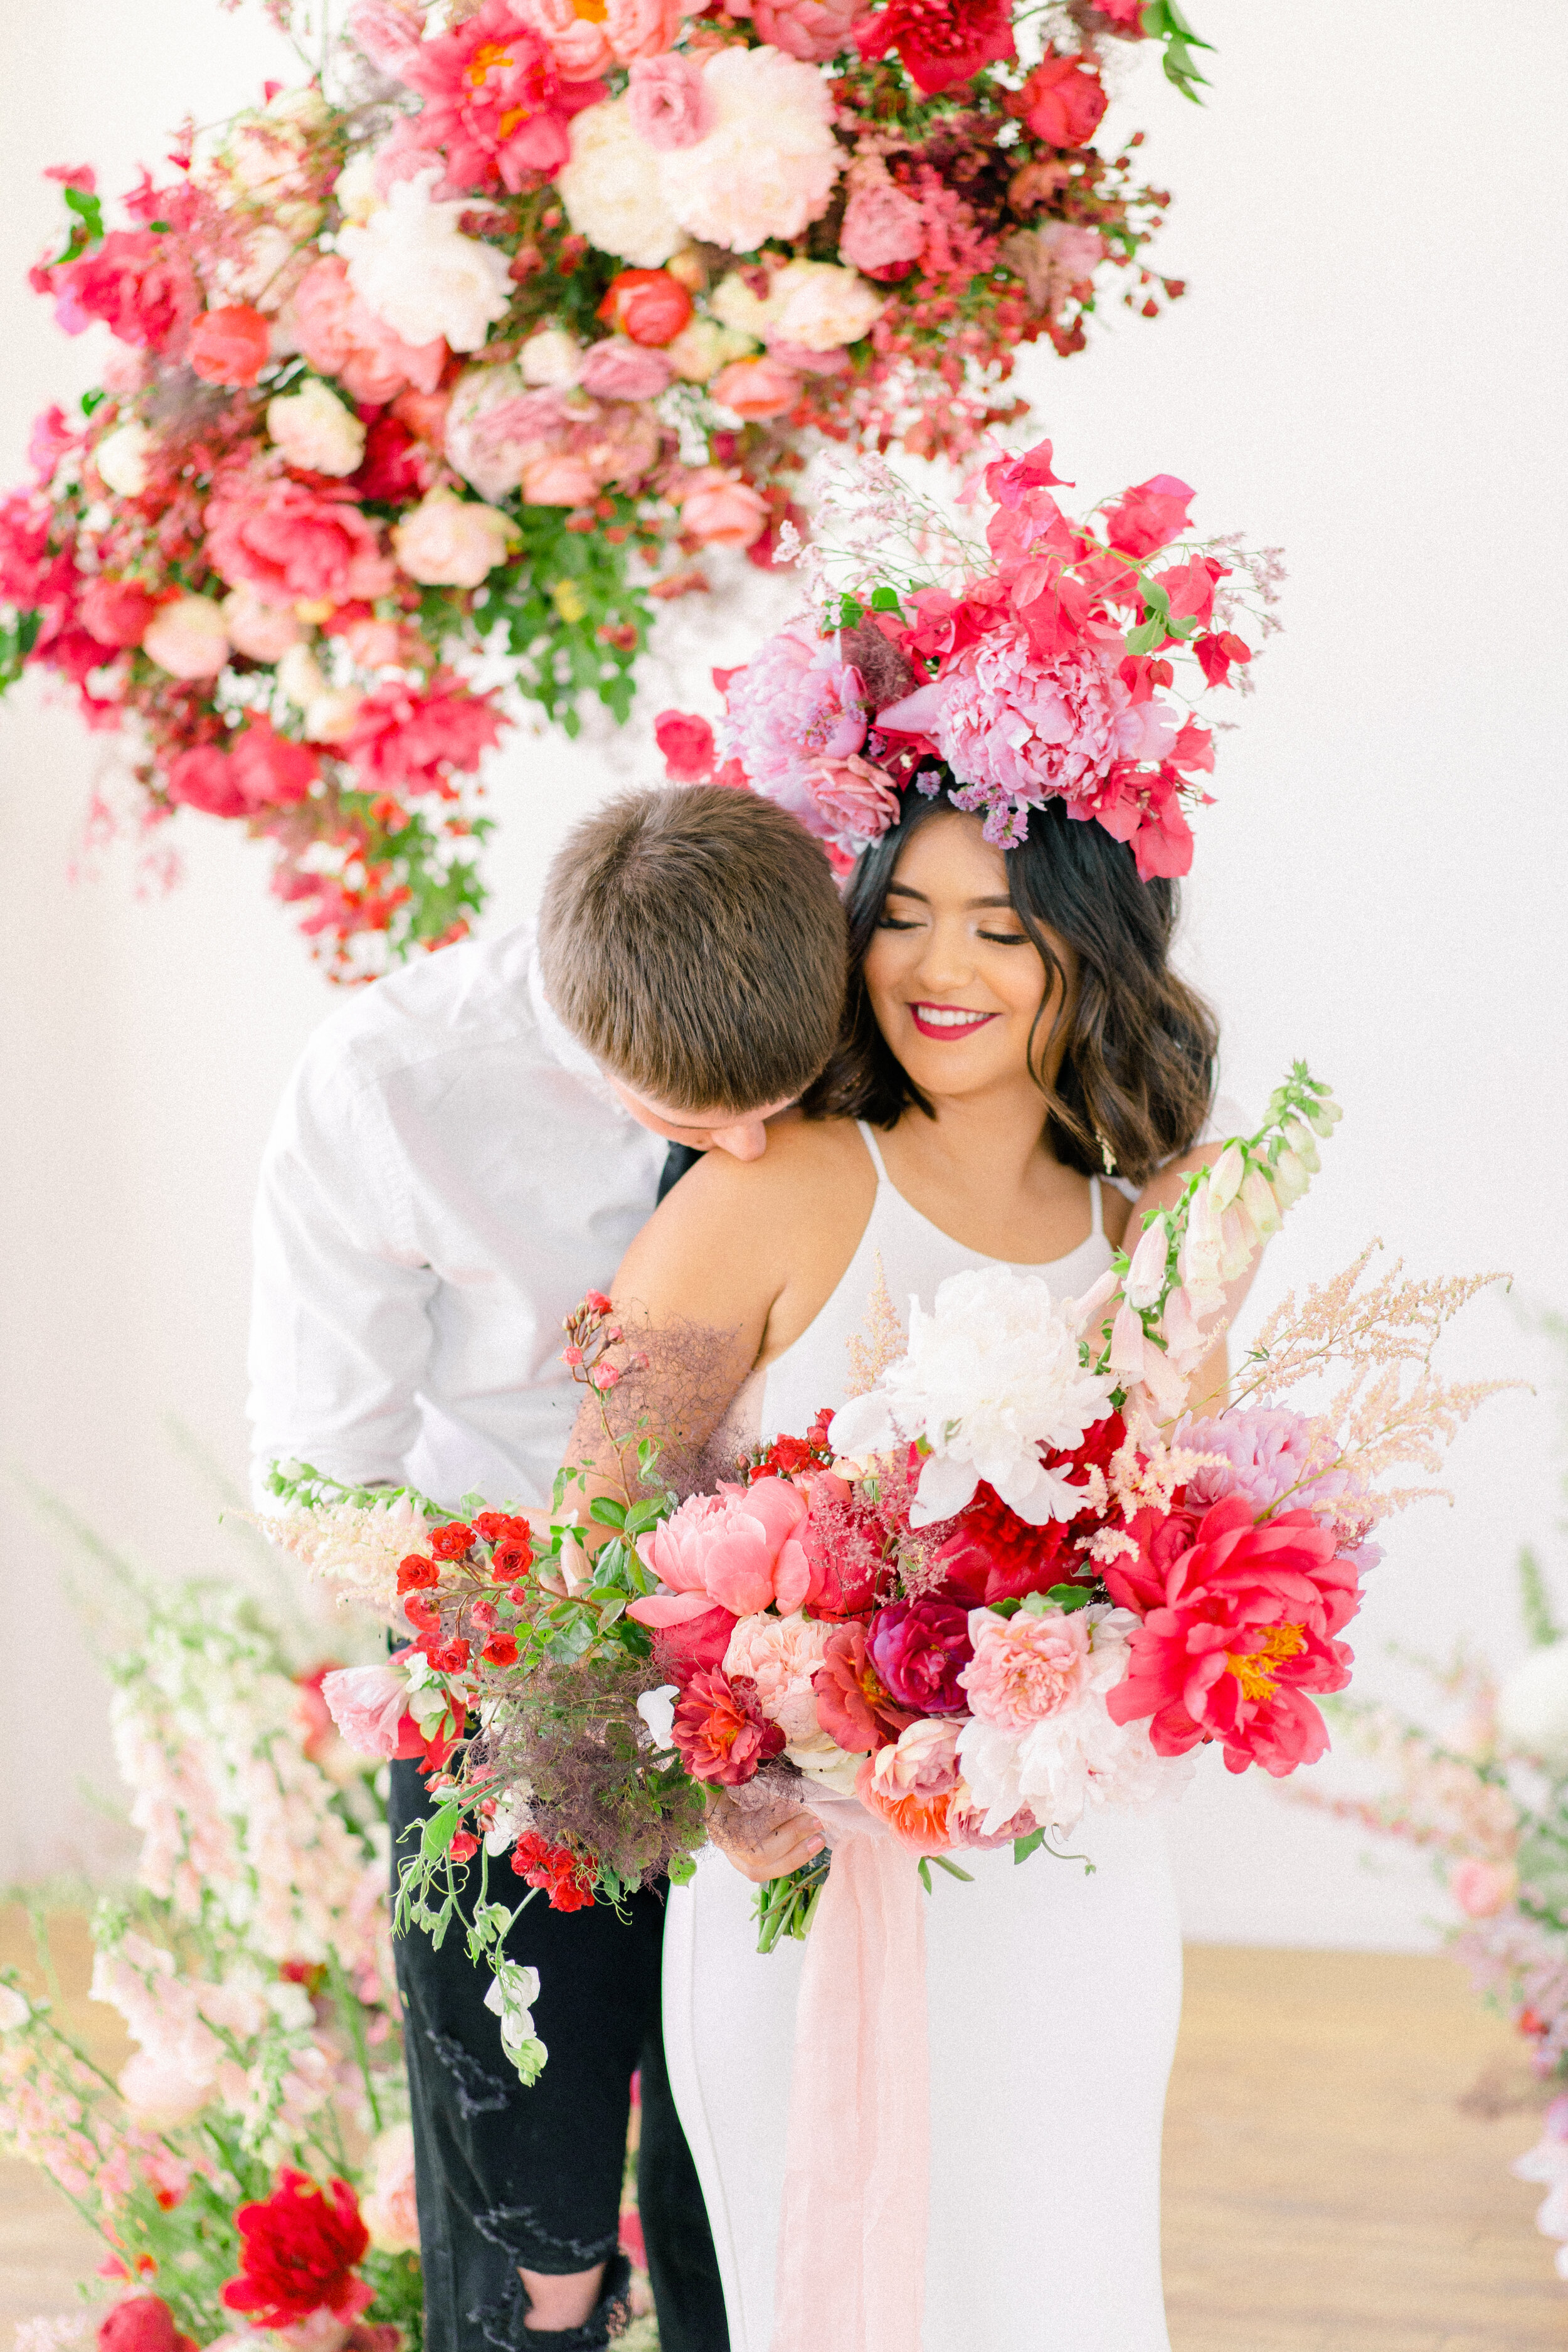 A Romantic Wedding Elopement Filled with Colorful Fuchsia - Sarahi Hadden Submission-89.jpg